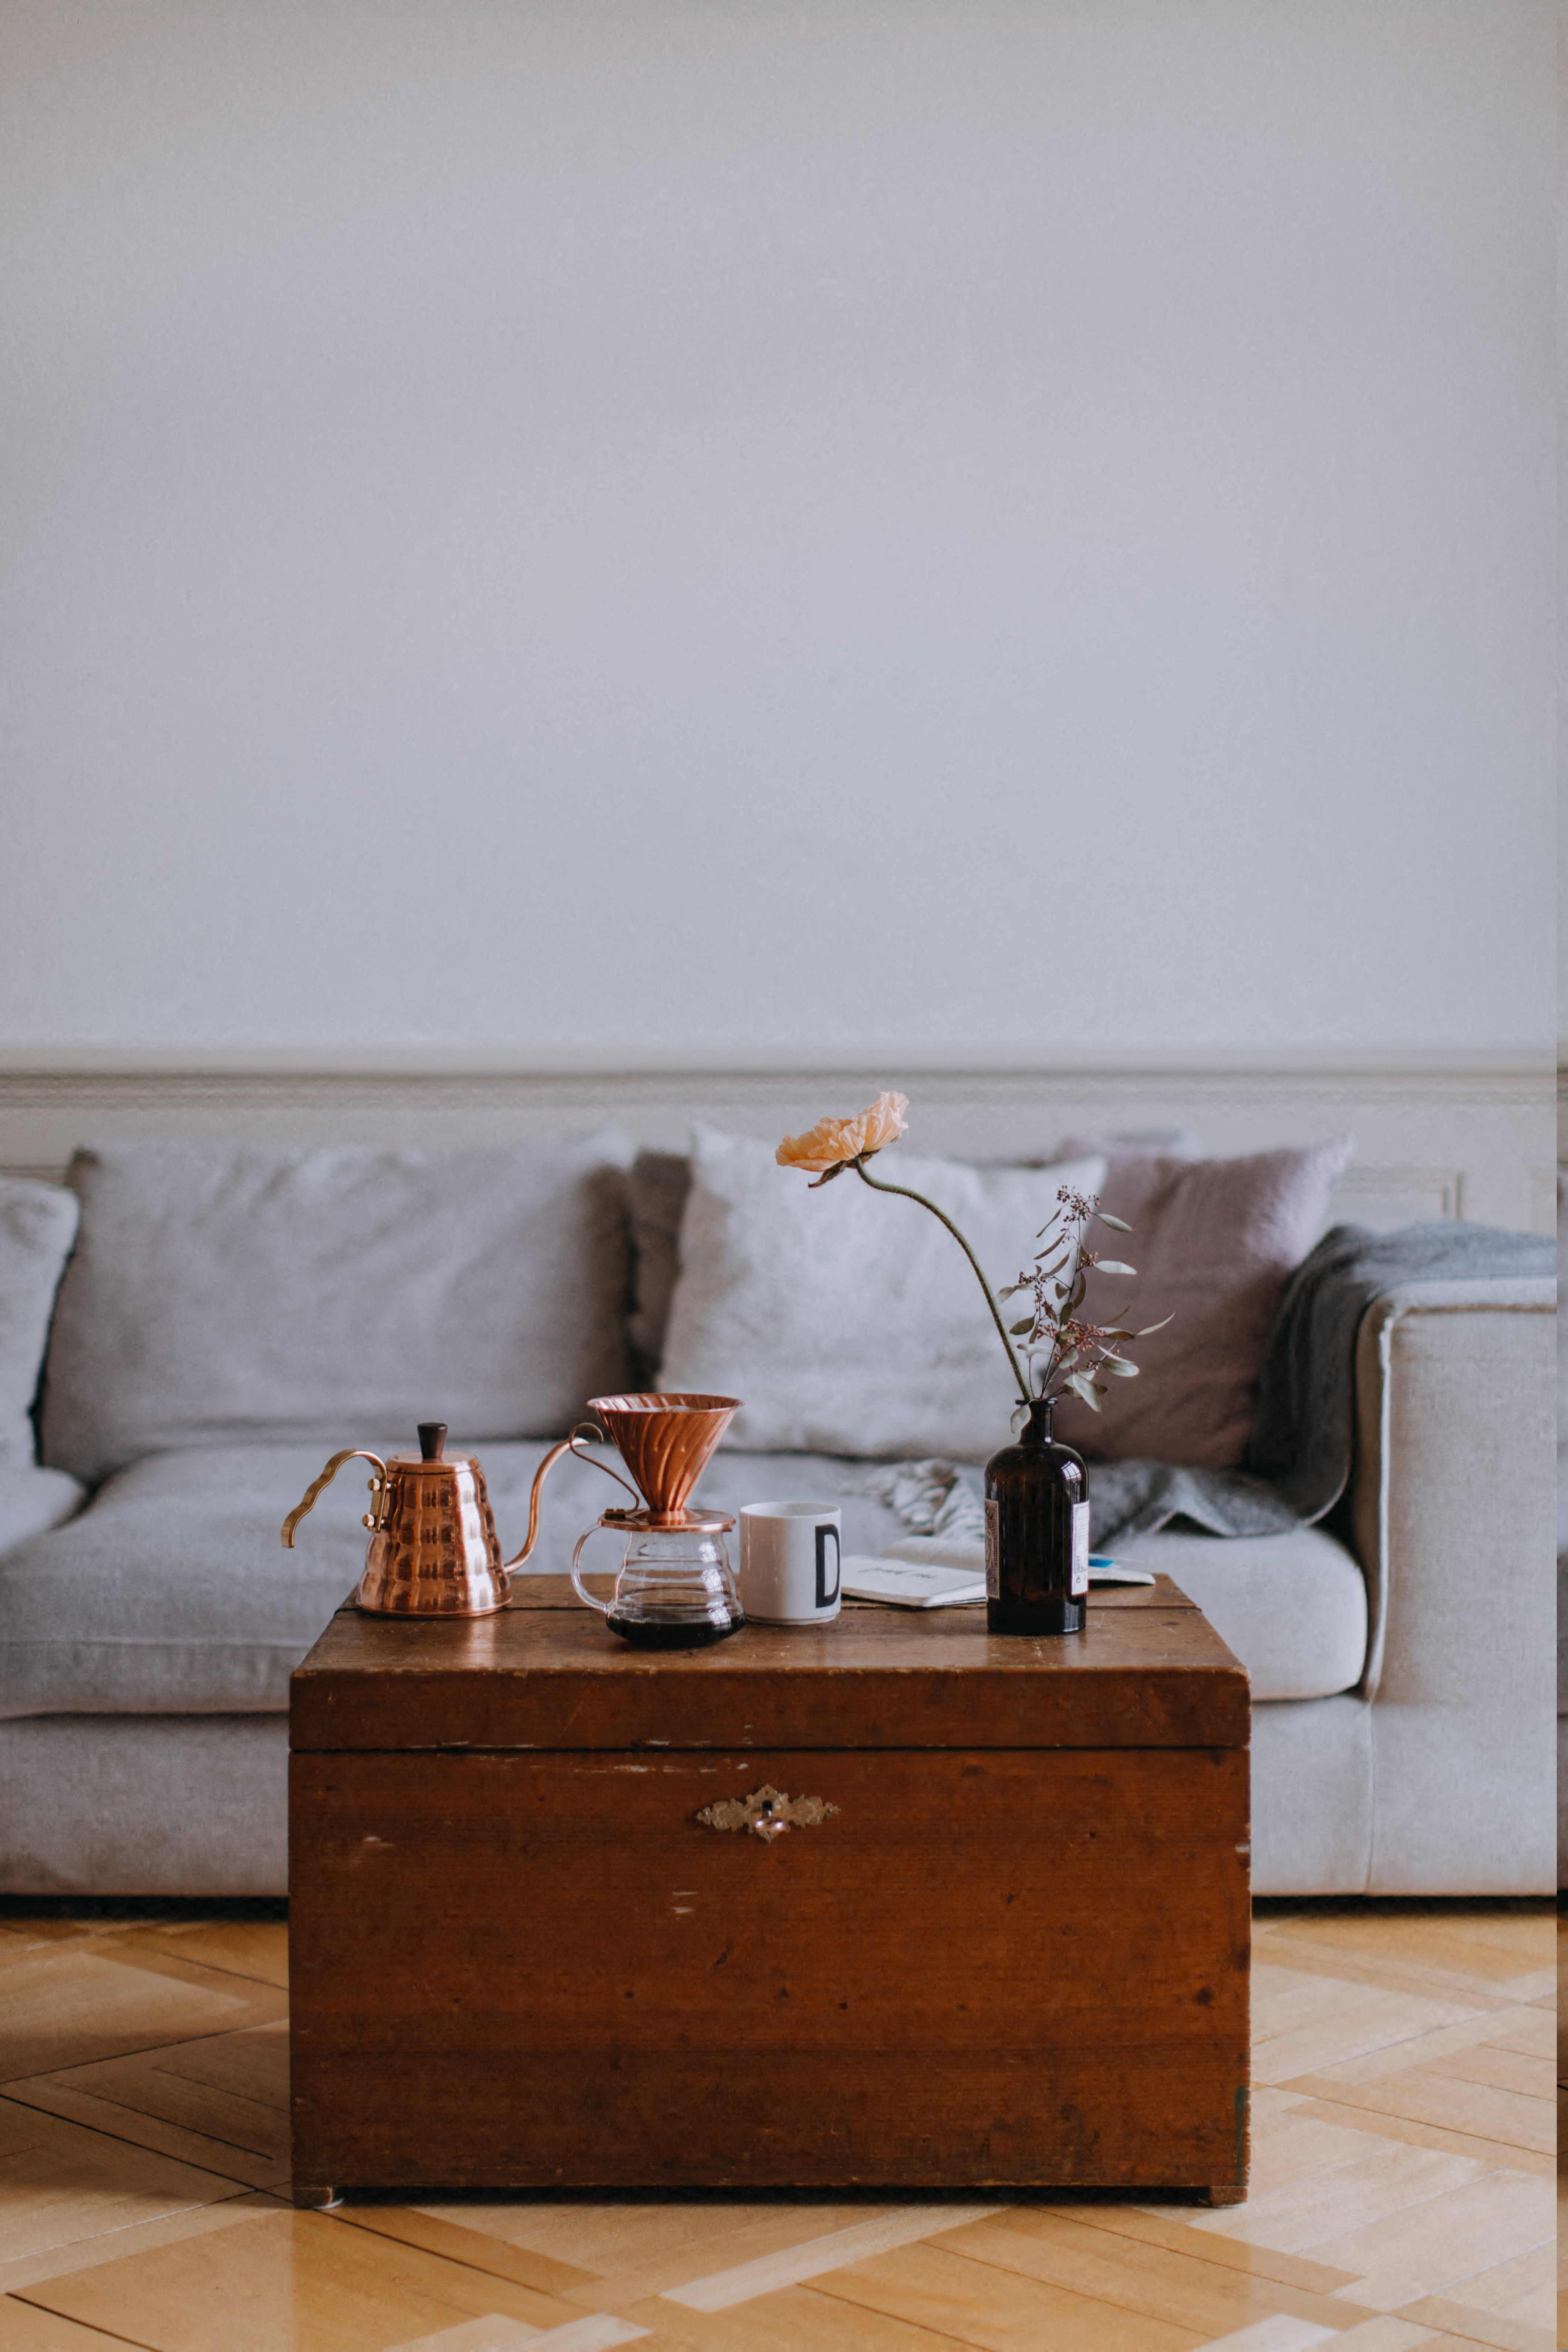 Stock Image of Living Room with Wood Coffee Table and Grey Couch